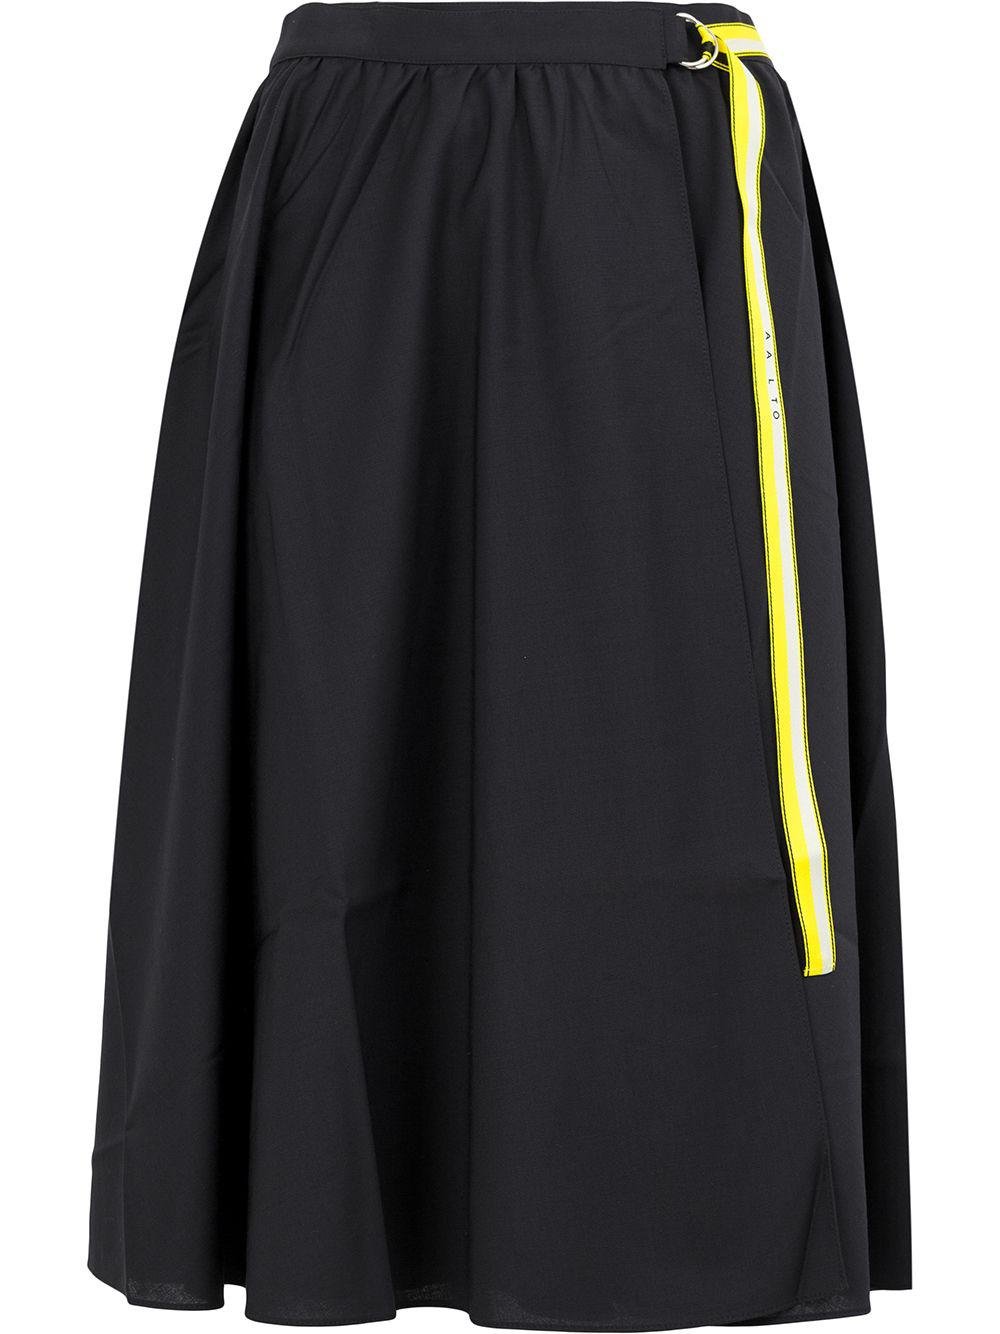 belted wrap front skirt by AALTO